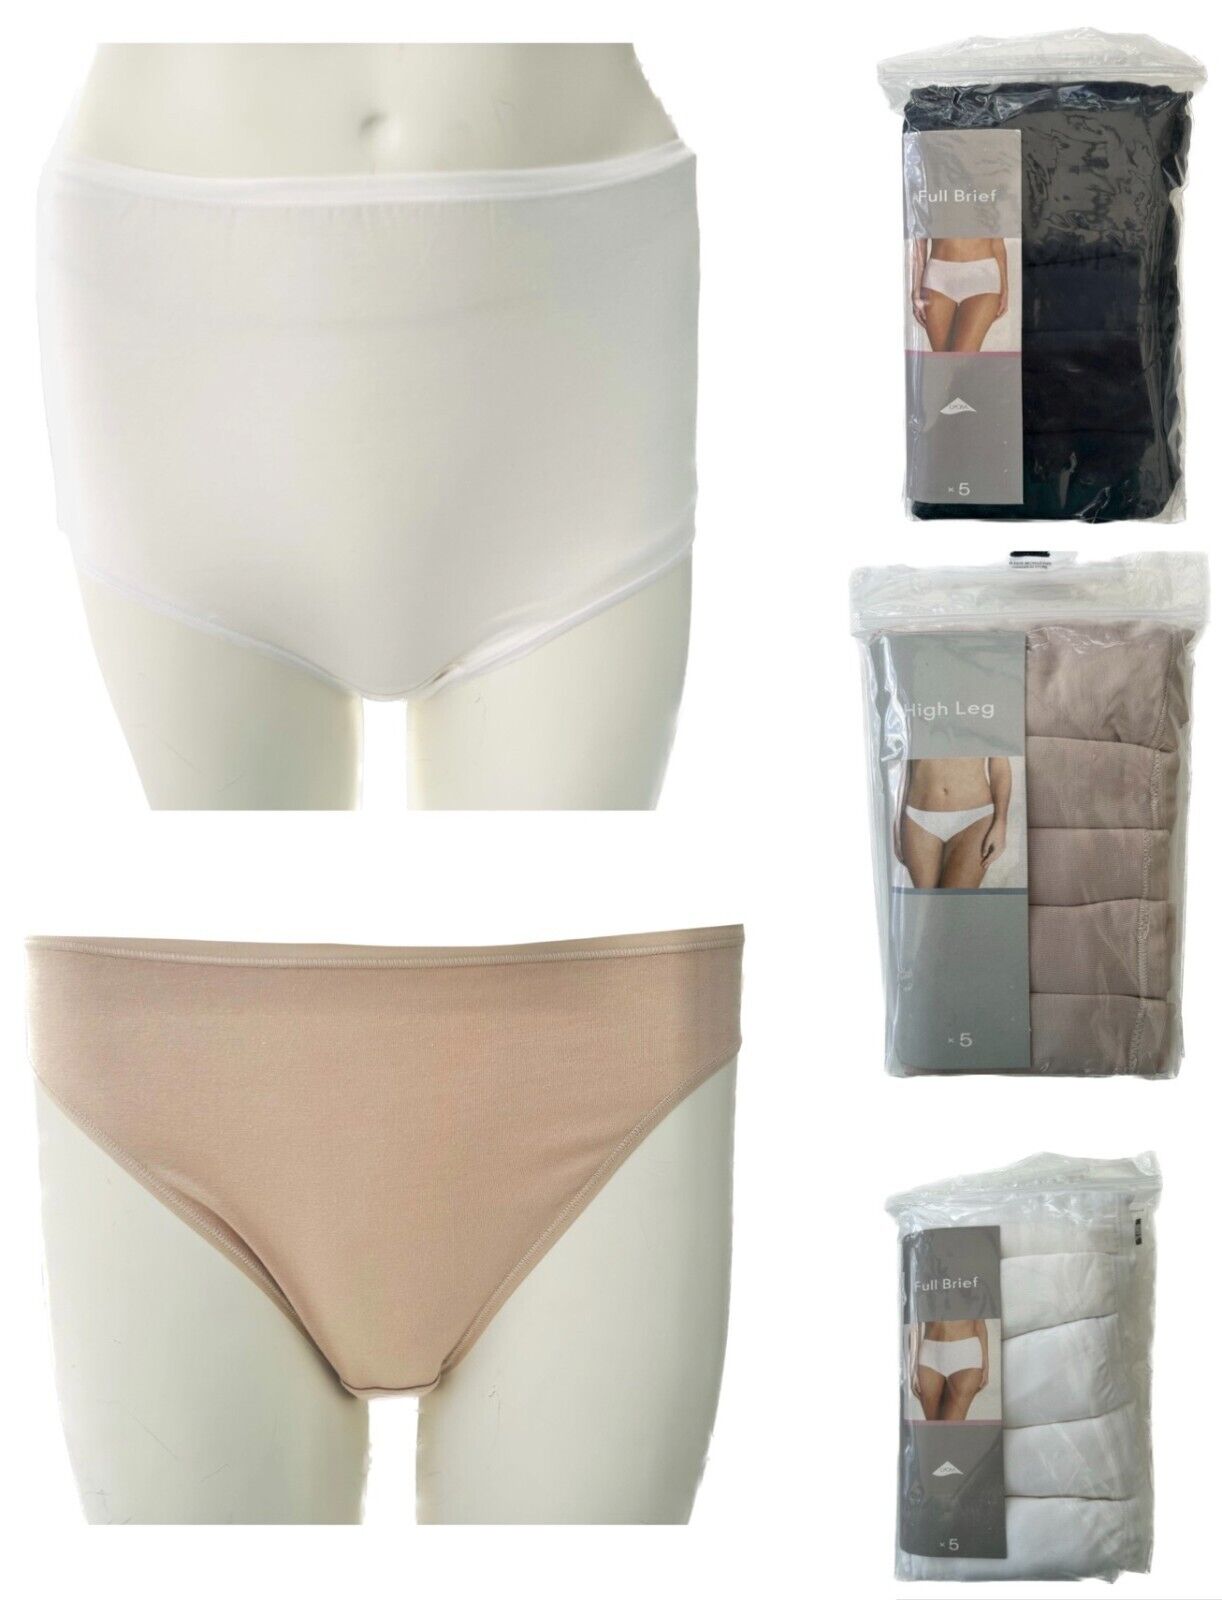 Ex Famous Store Brand Ladies 5 Pack Knickers Cotton Modal Nude White Black  No VPL Full Briefs High